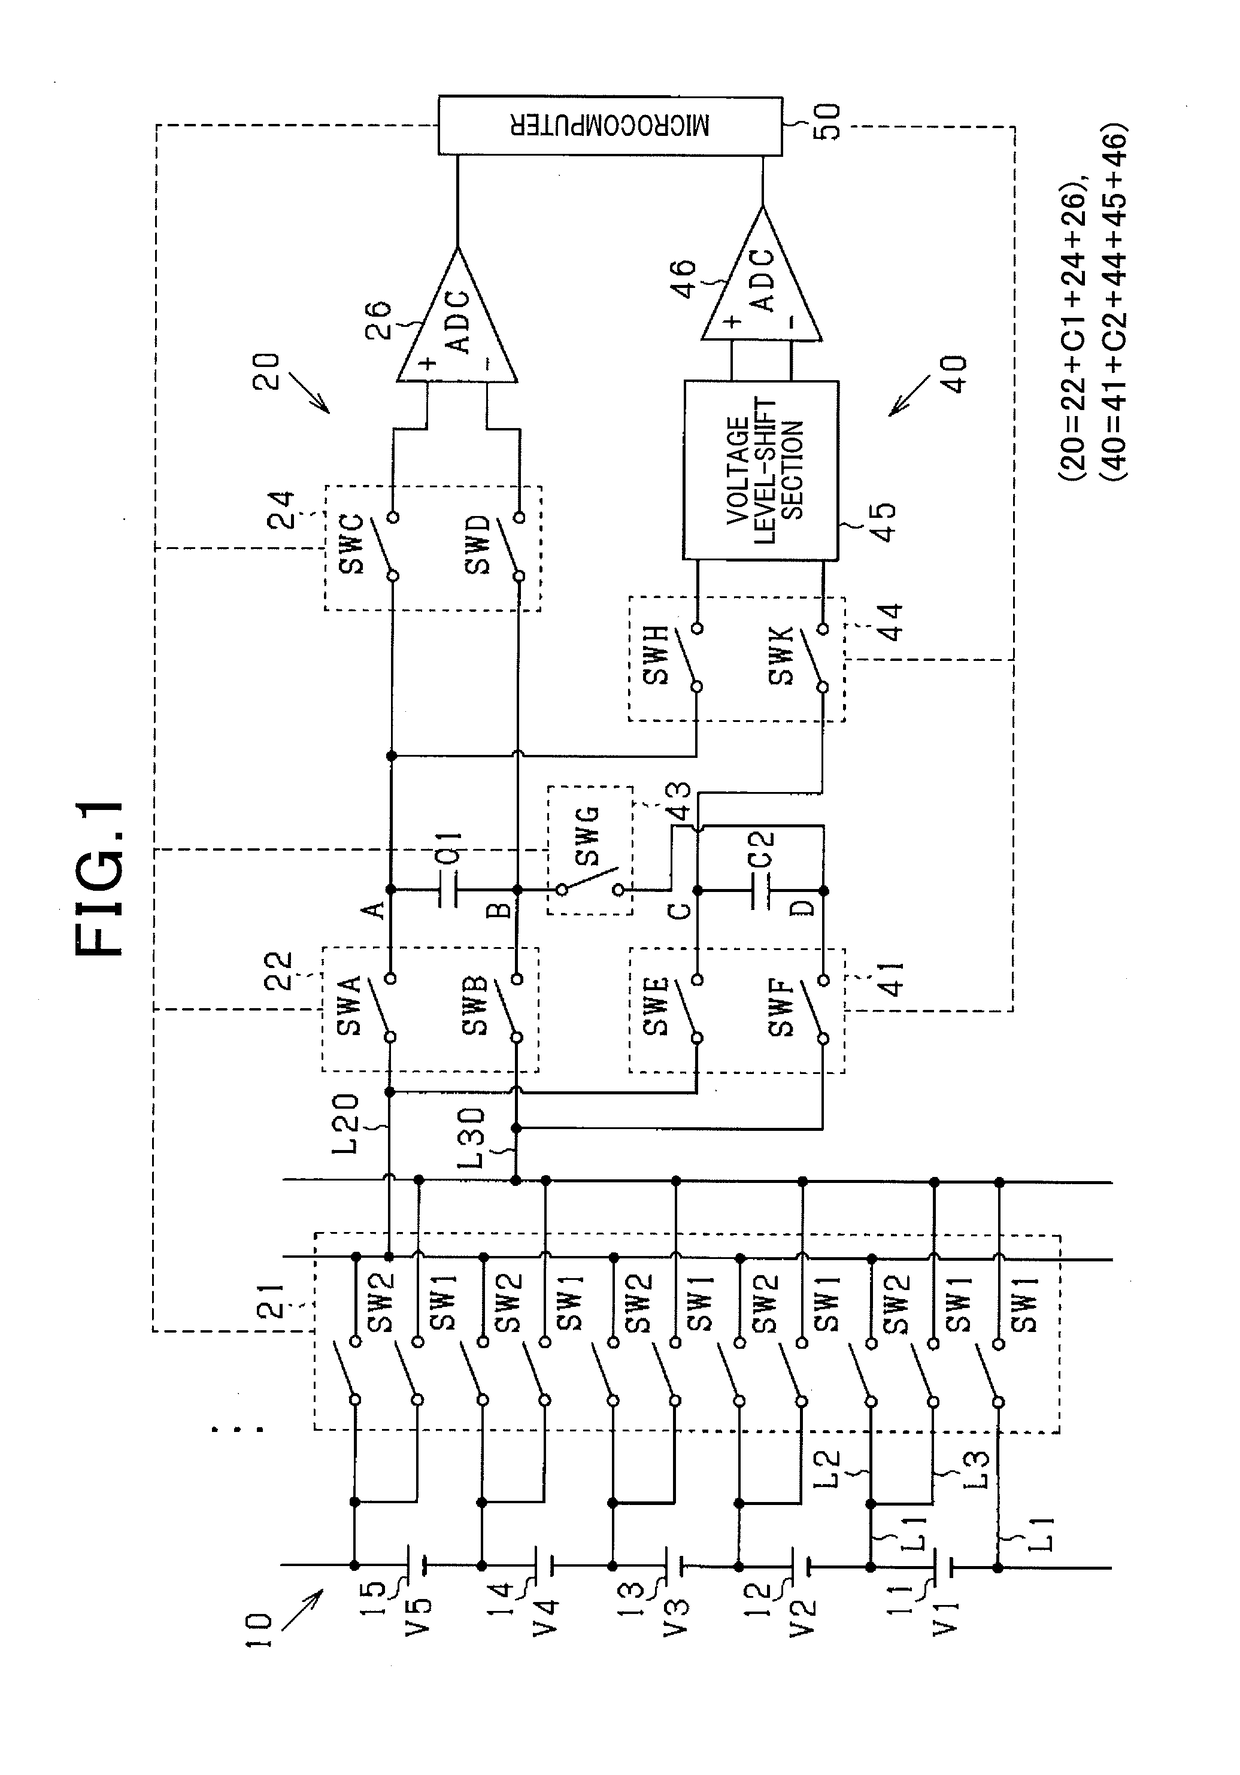 Battery monitoring system for detecting a voltage difference of unit cells connected in series in a battery pack